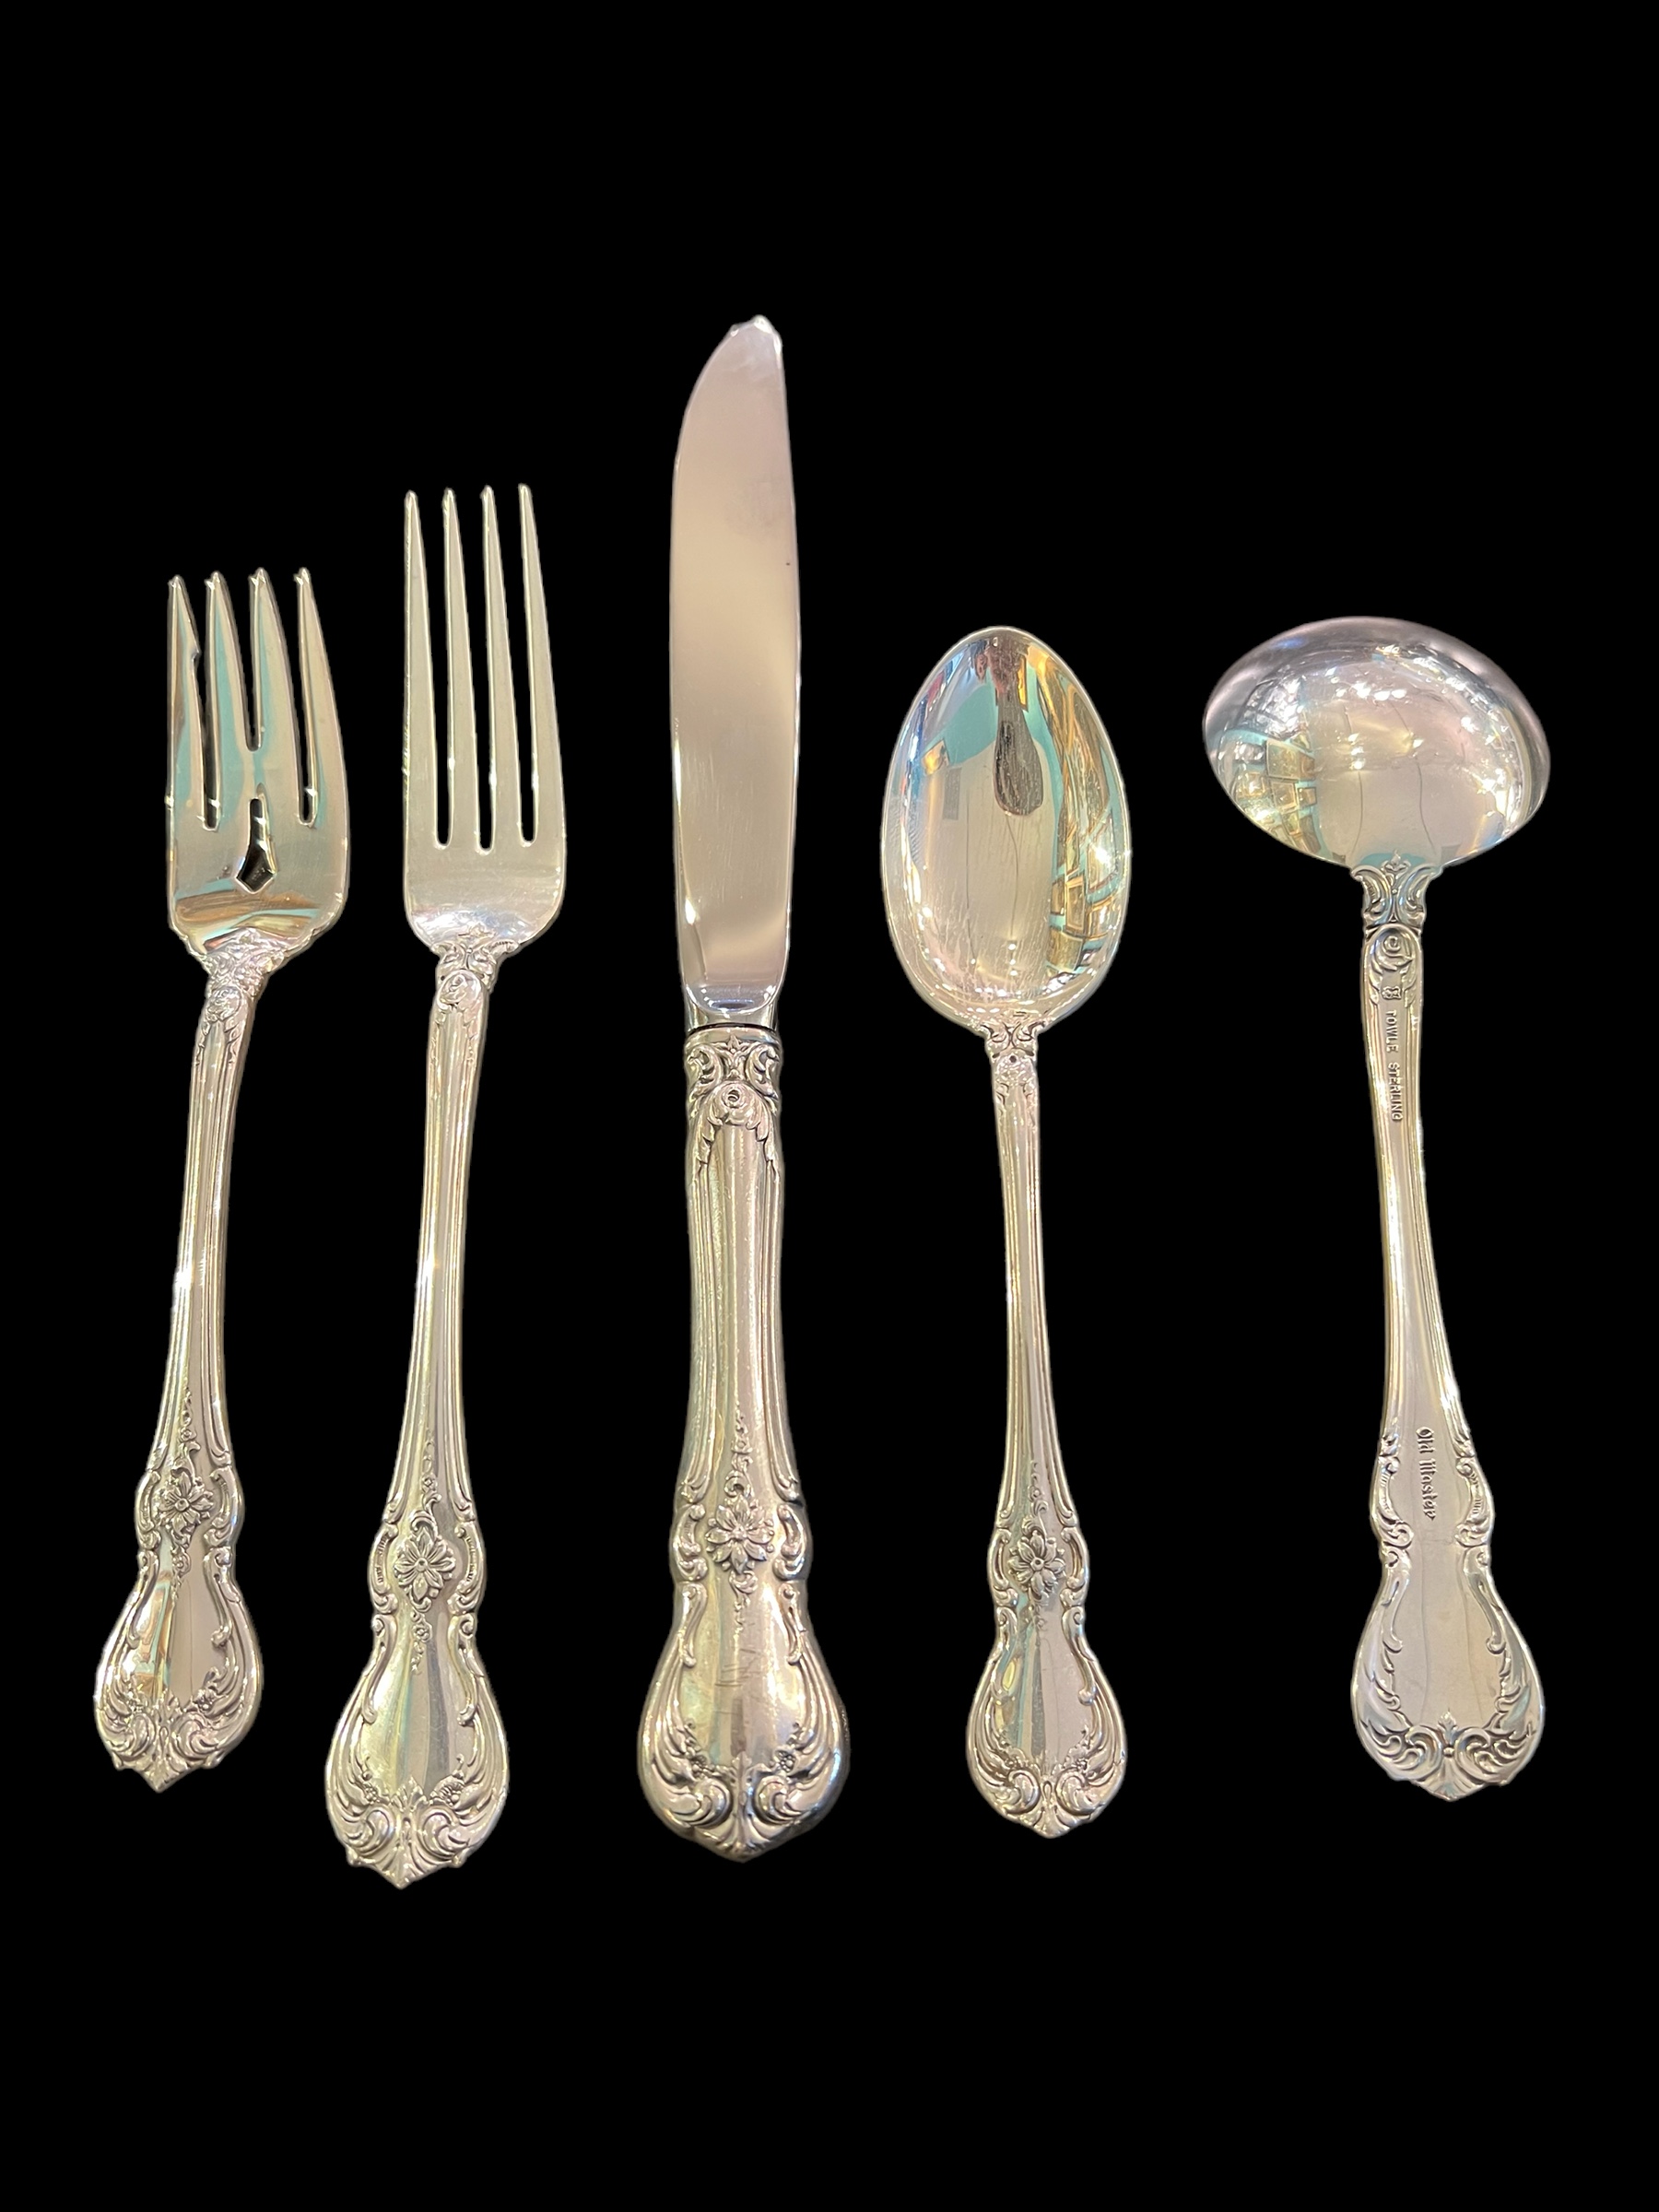 Towle Old Master Sterling Flatware